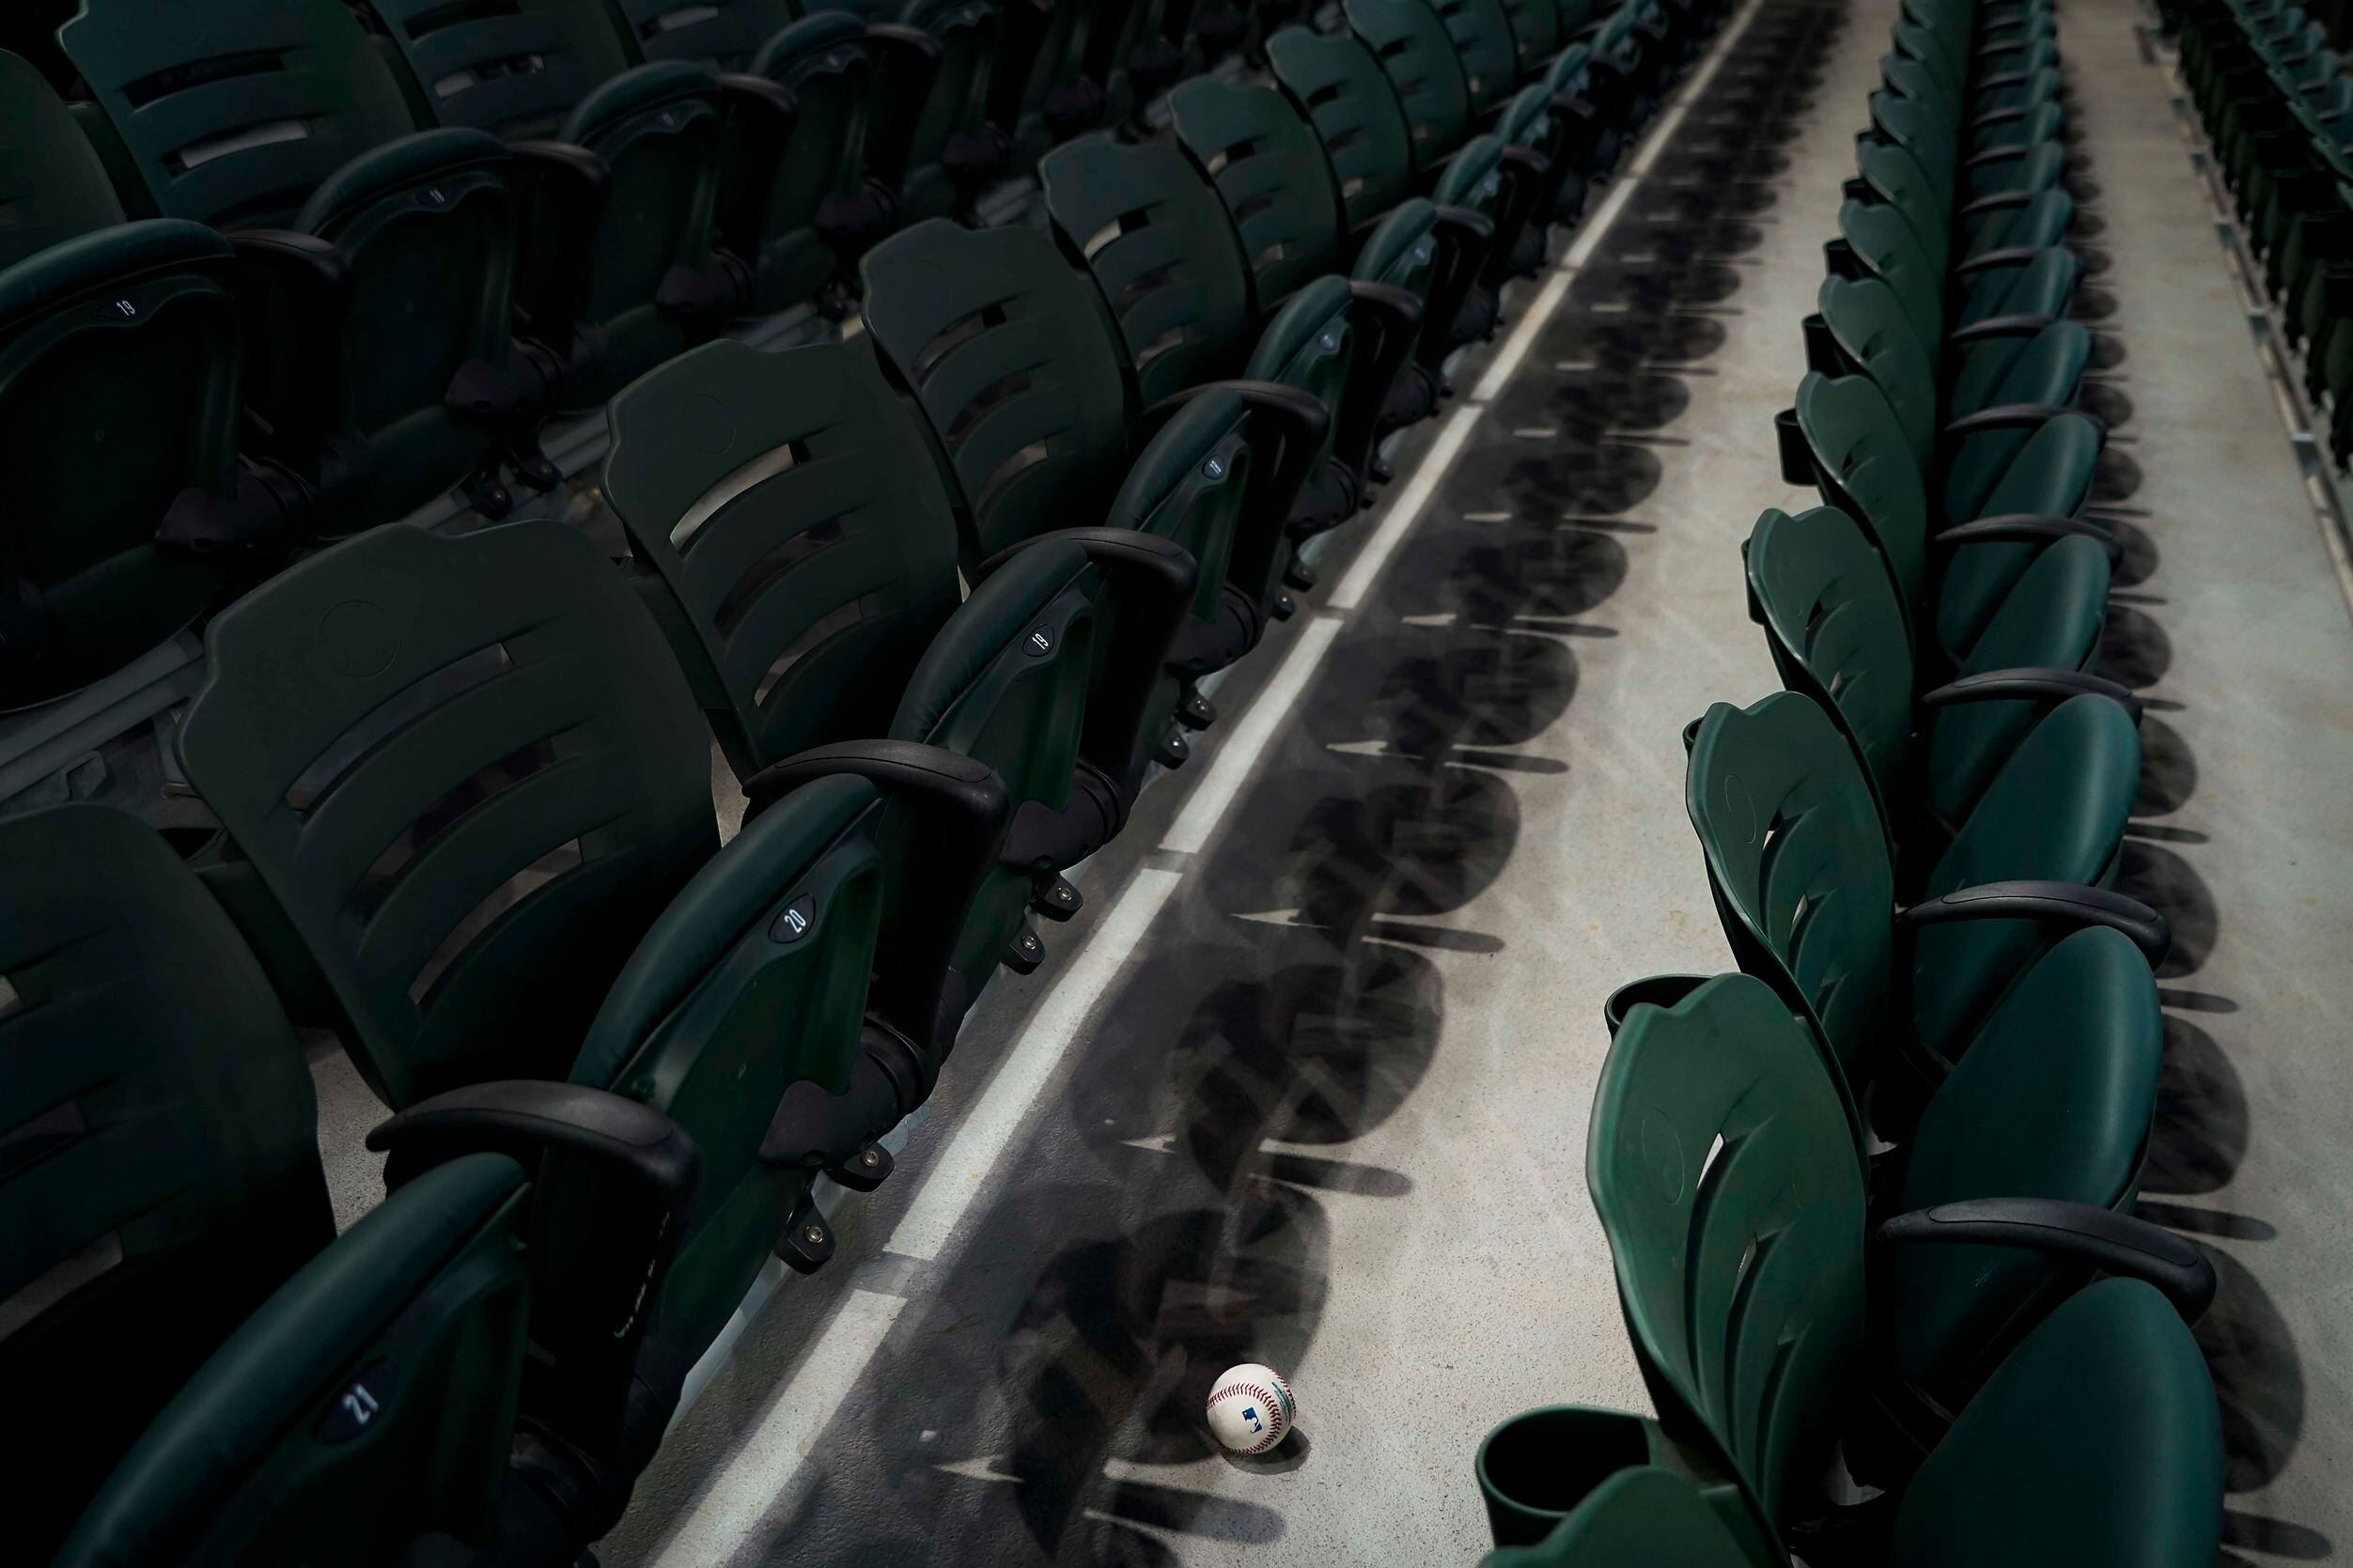 A baseball rests among empty rows of seats after being fouled off by a batter in an...